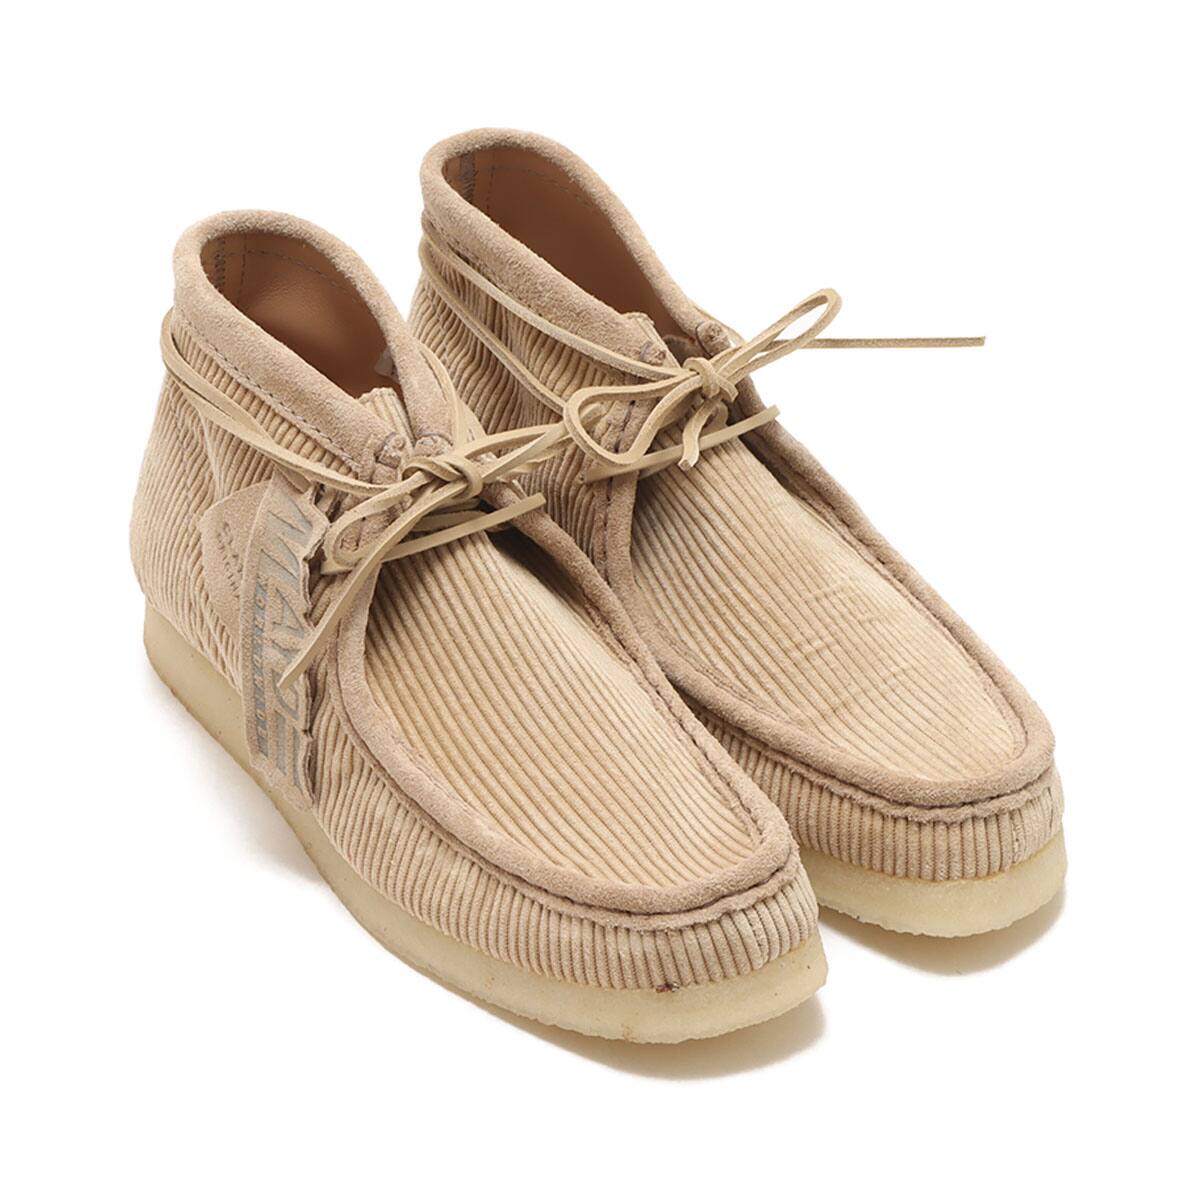 clarks wallabee ライトピンク　23㎝